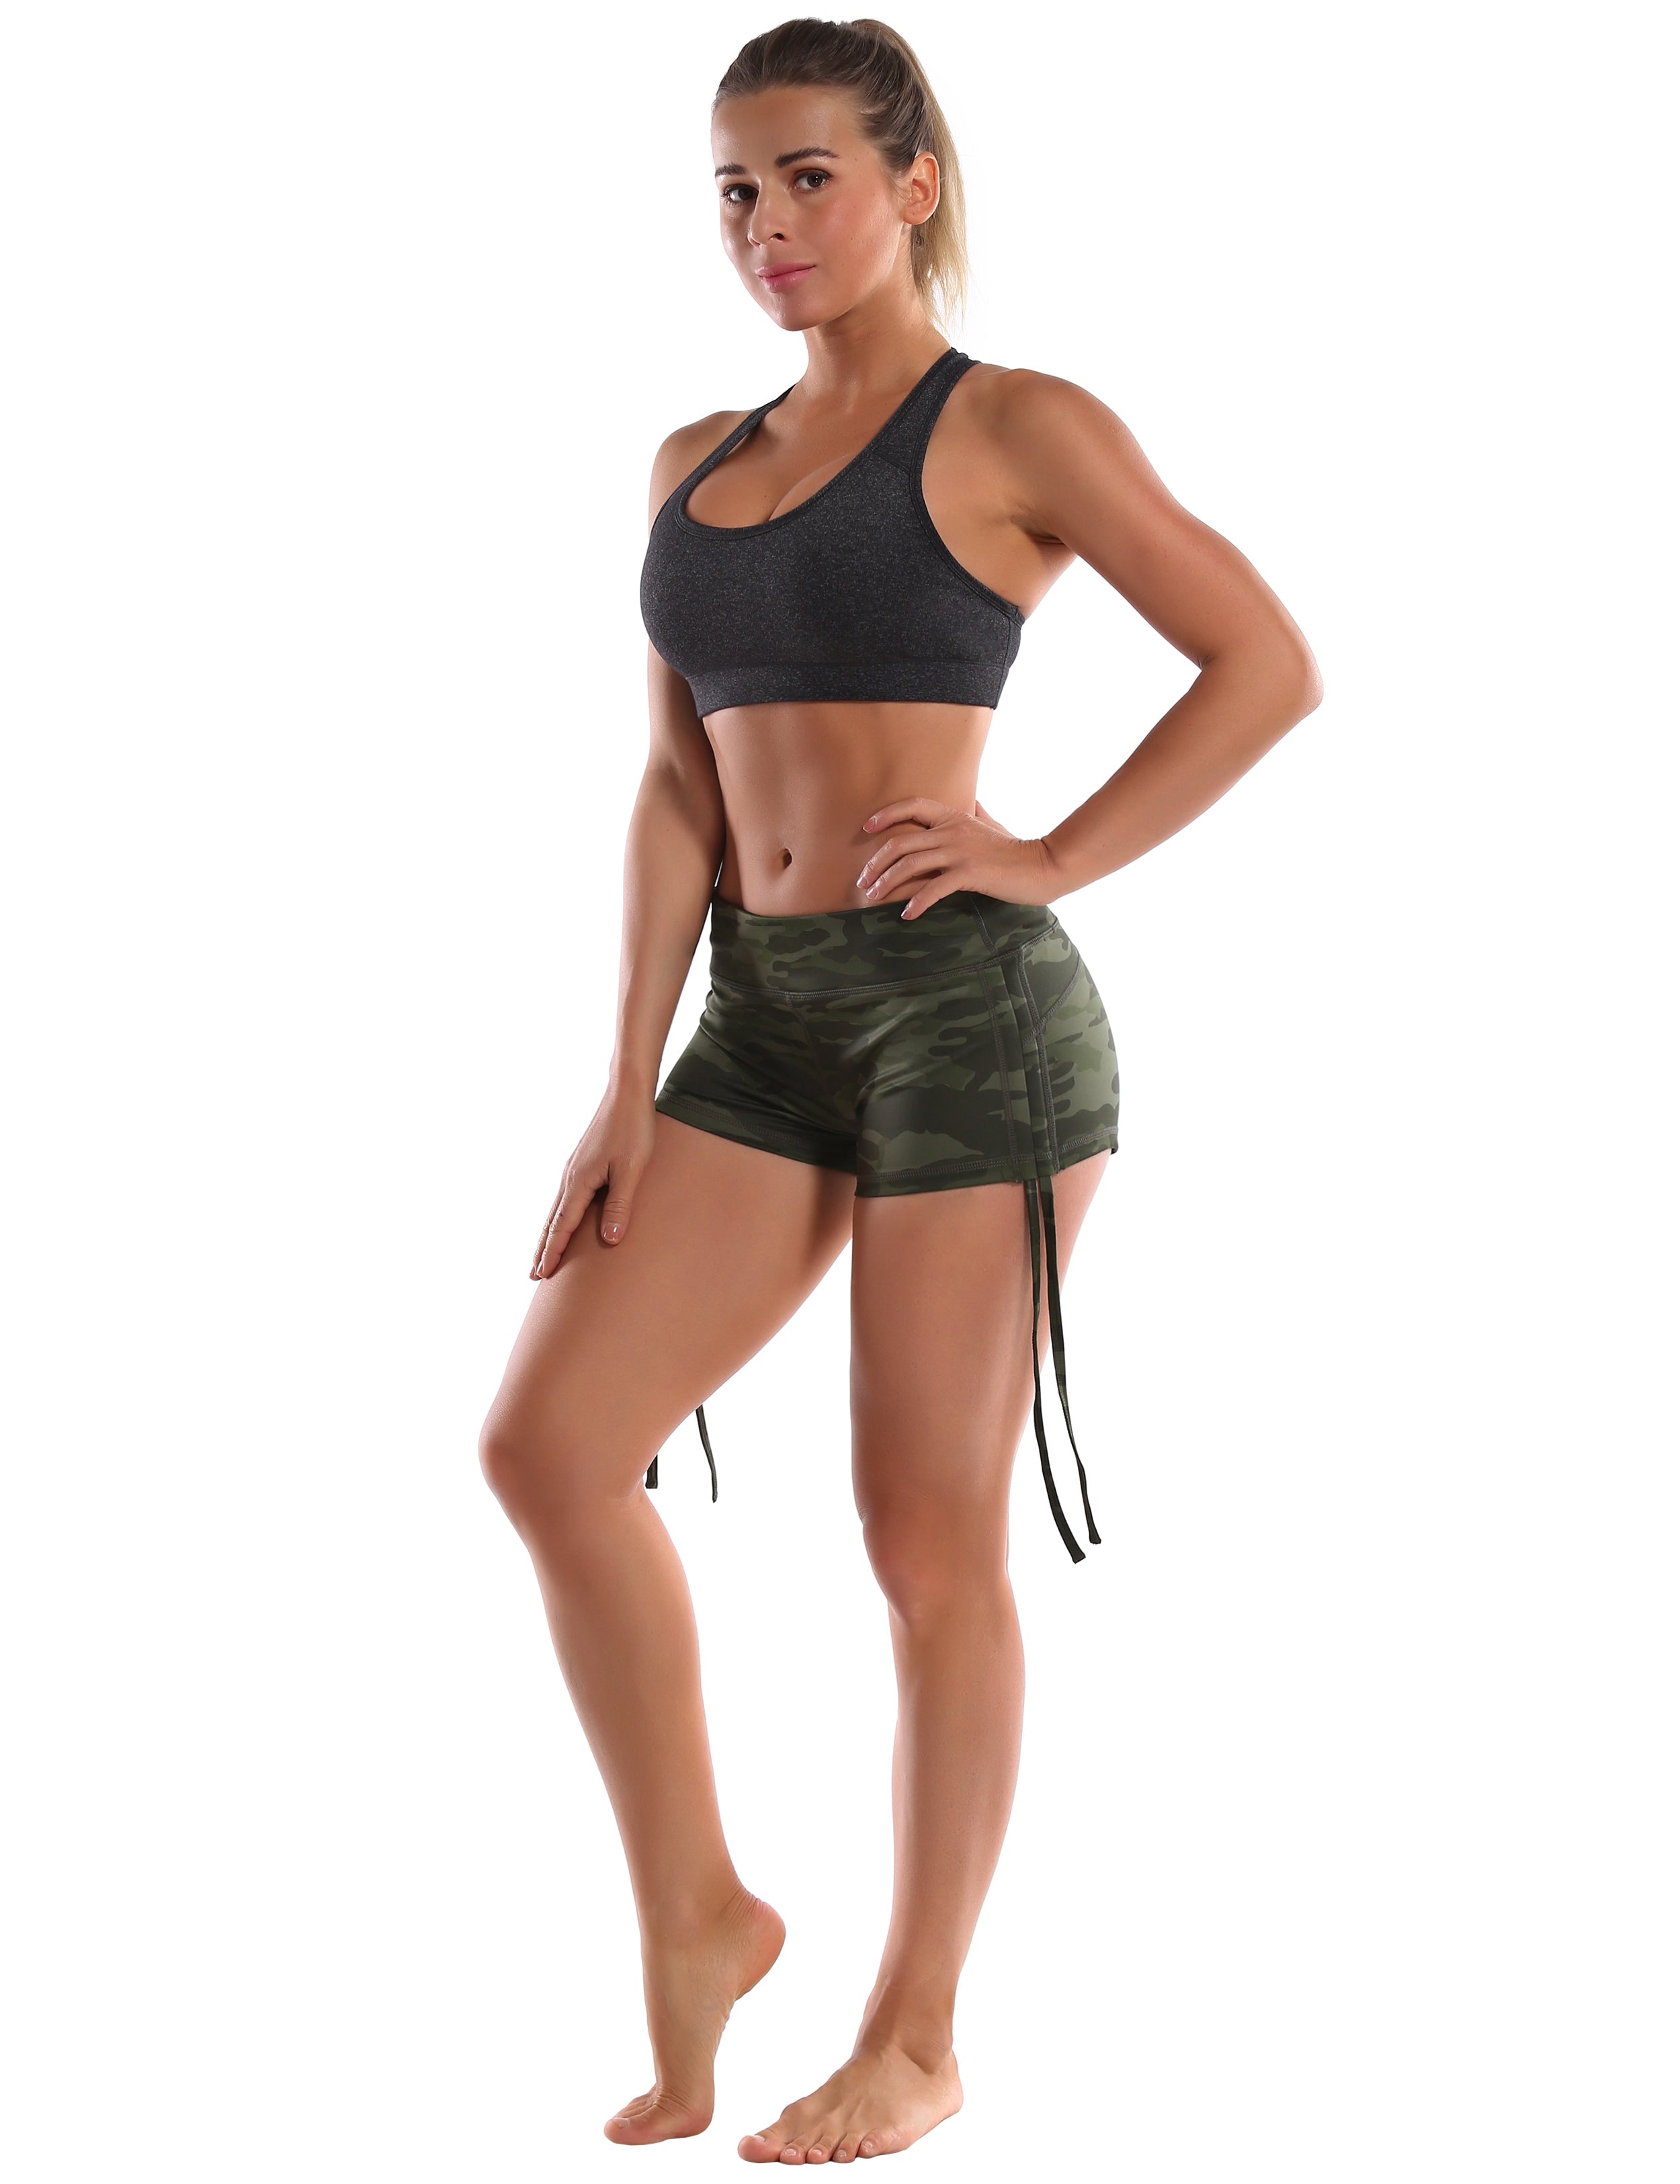 Printed Side Drawstring Hot Shorts green camo Sleek, soft, smooth and totally comfortable: our newest sexy style is here. Softest-ever fabric High elasticity High density 4-way stretch Fabric doesn't attract lint easily No see-through Moisture-wicking Machine wash 78% Polyester, 22% Spandex